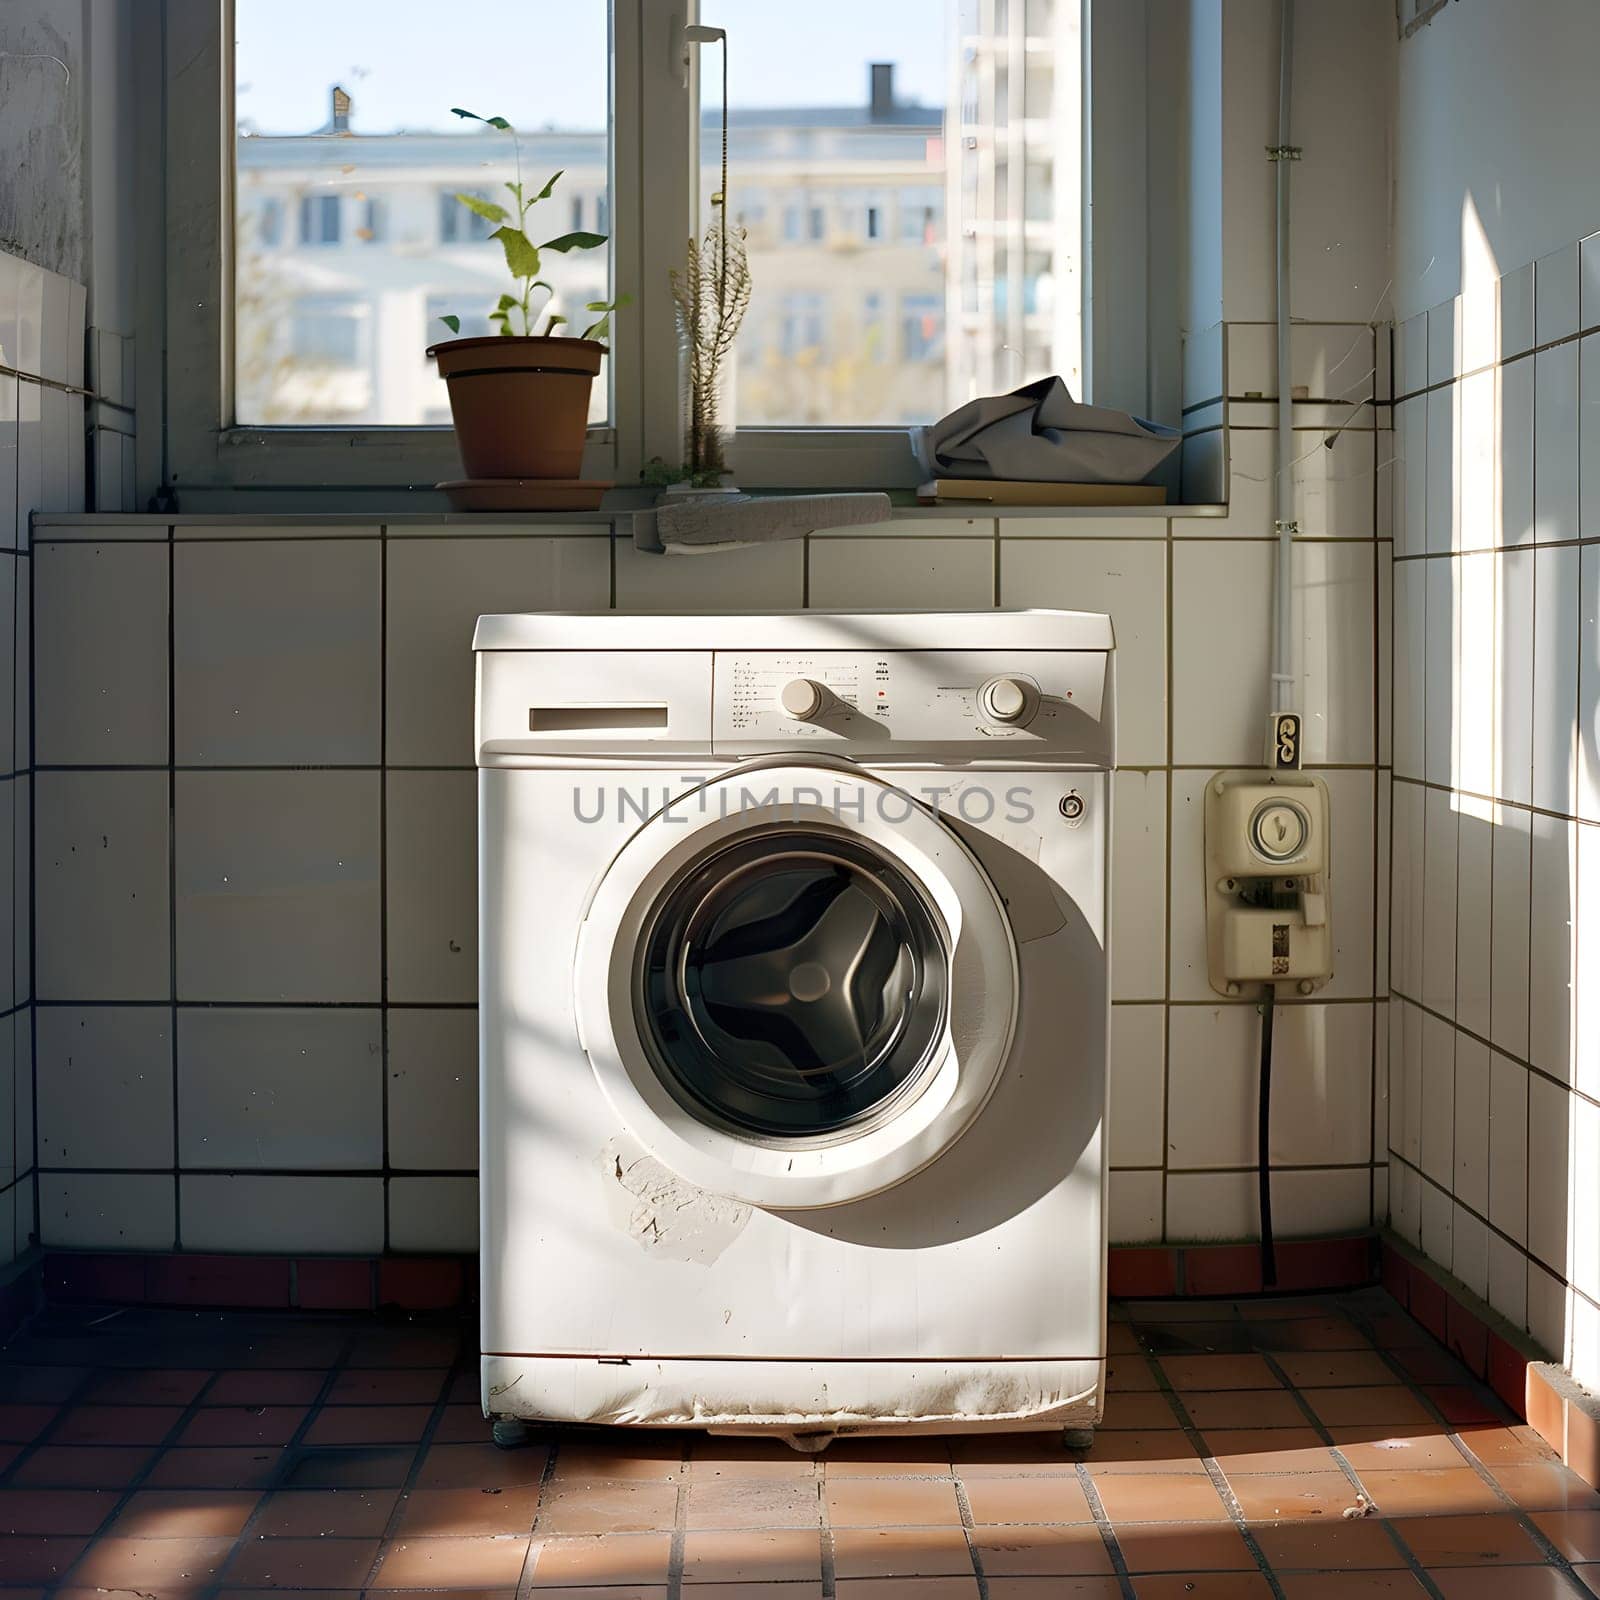 White washing machine in laundry room next to window by Nadtochiy